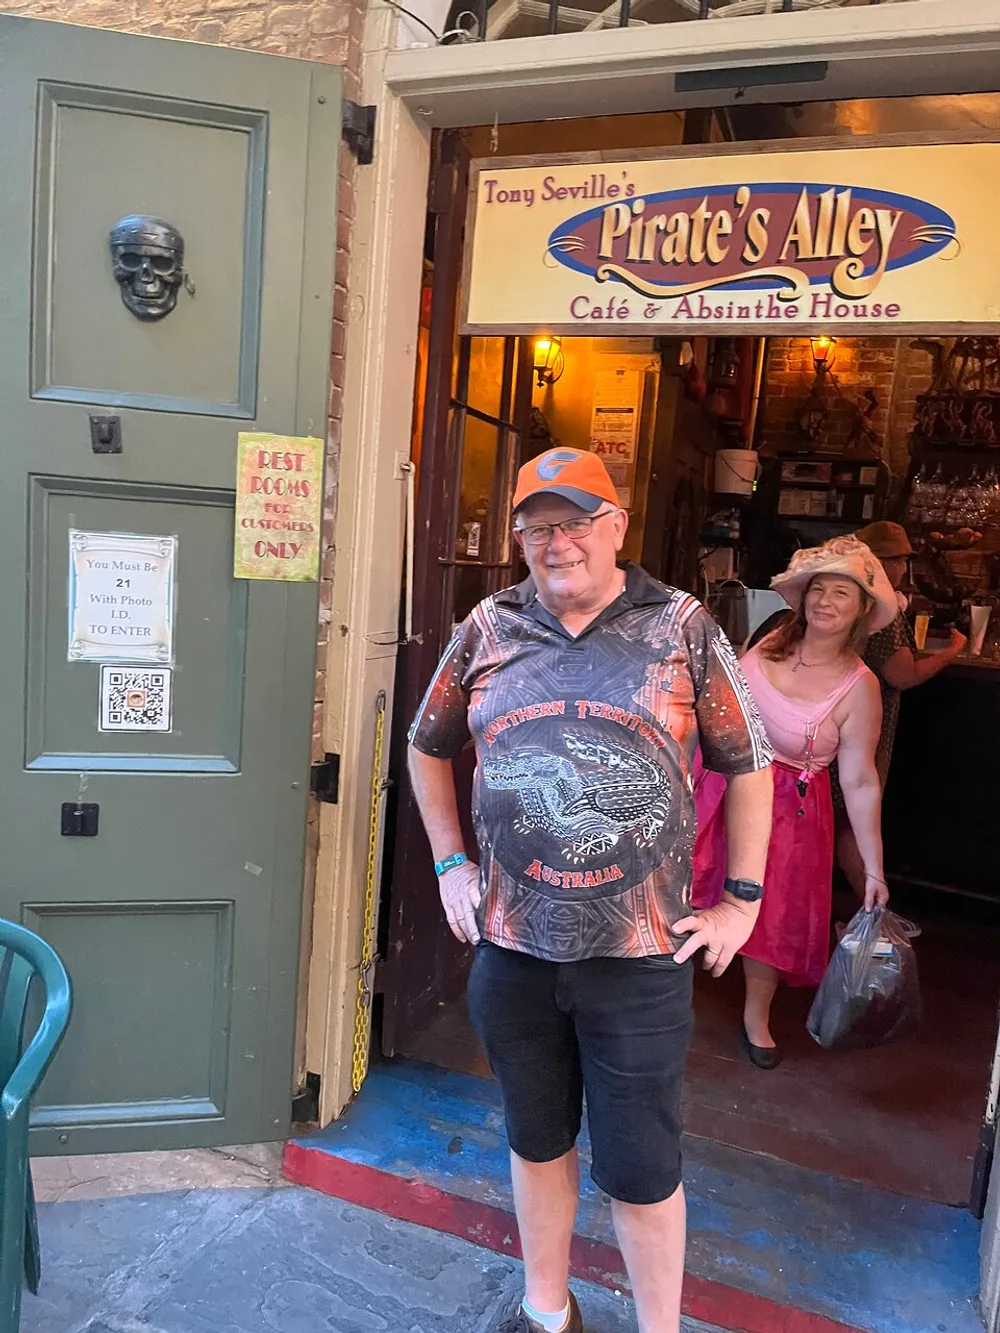 A man in a graphic shirt and a cap stands smiling in front of Tony Sevilles Pirates Alley Caf and Absinthe House with a woman peeking from behind and a decorative skull affixed to the green door on the left